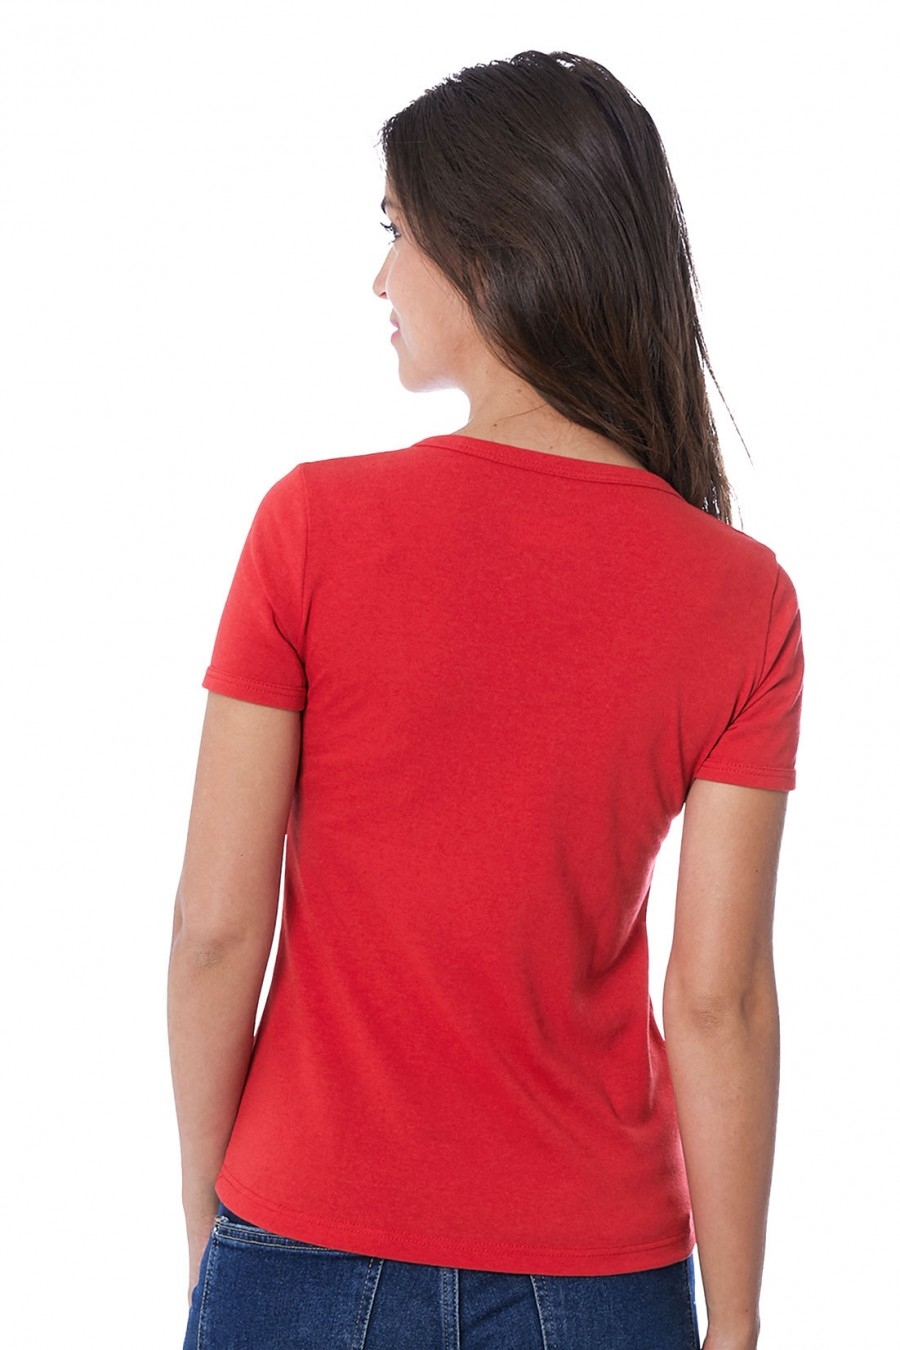 T-SHIRT FEMME MANCHE COURTE COL V ROUGE - Made in France & 100% Recyclé